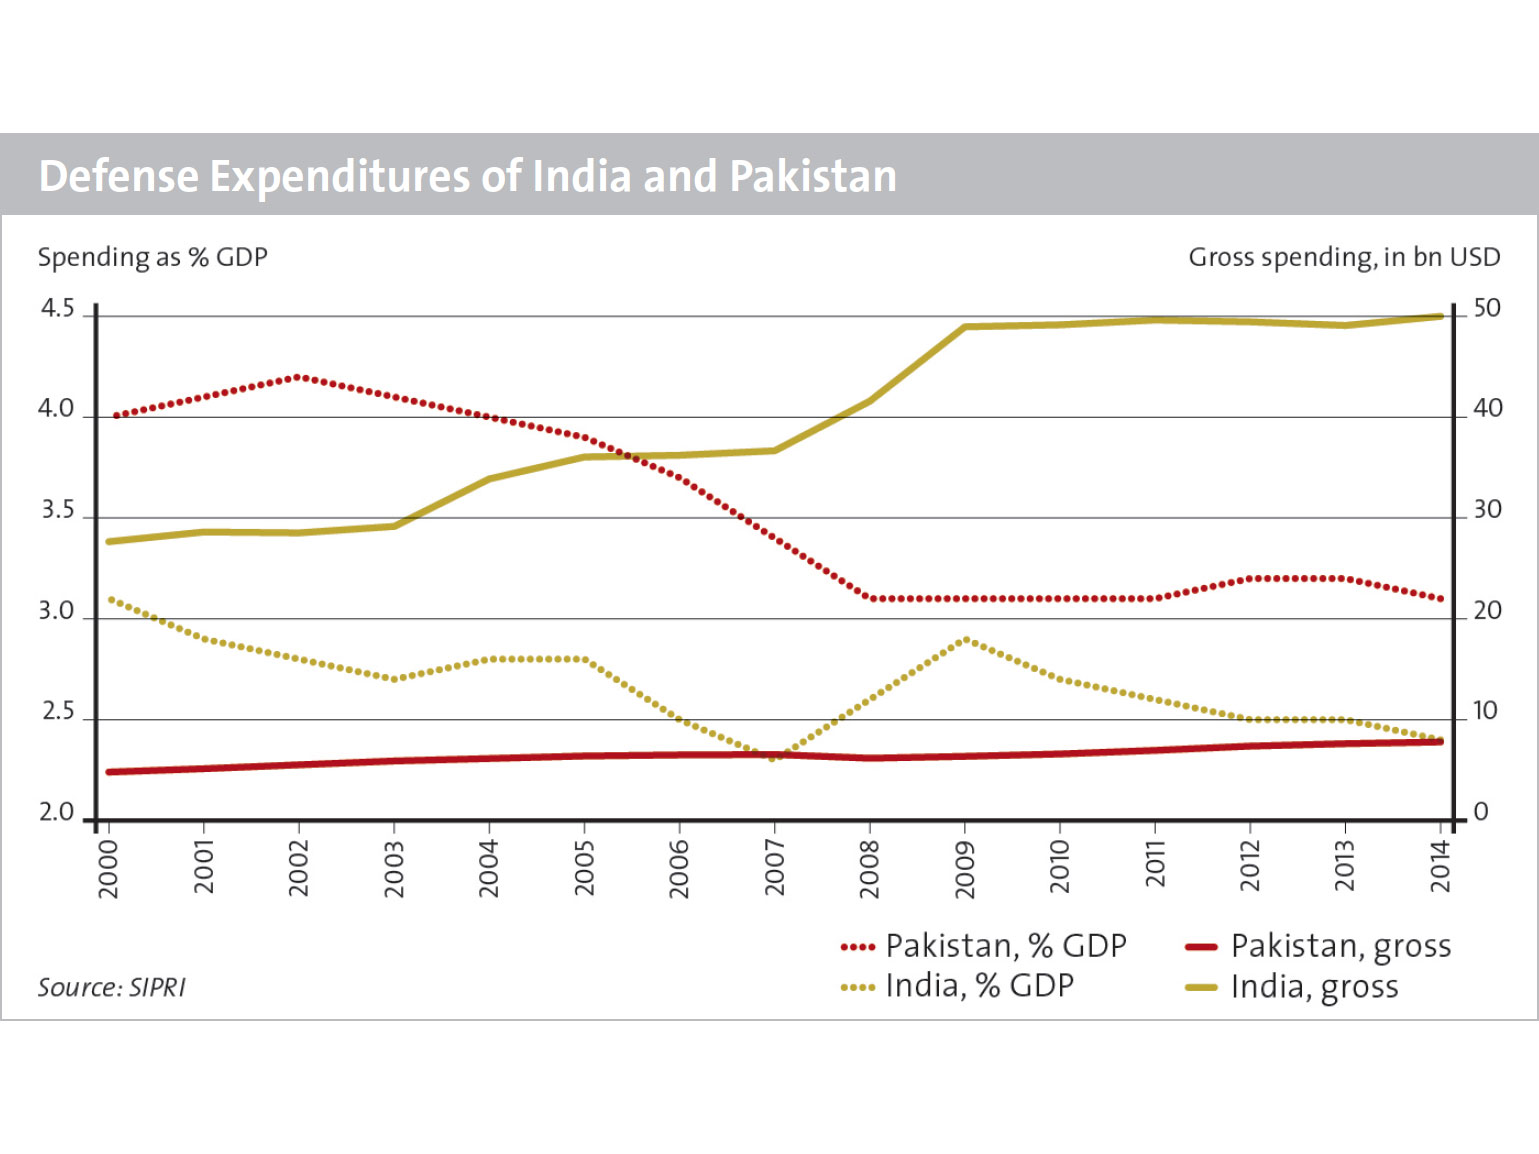 Enlarged view: Defense Expenditures of India and Pakistan